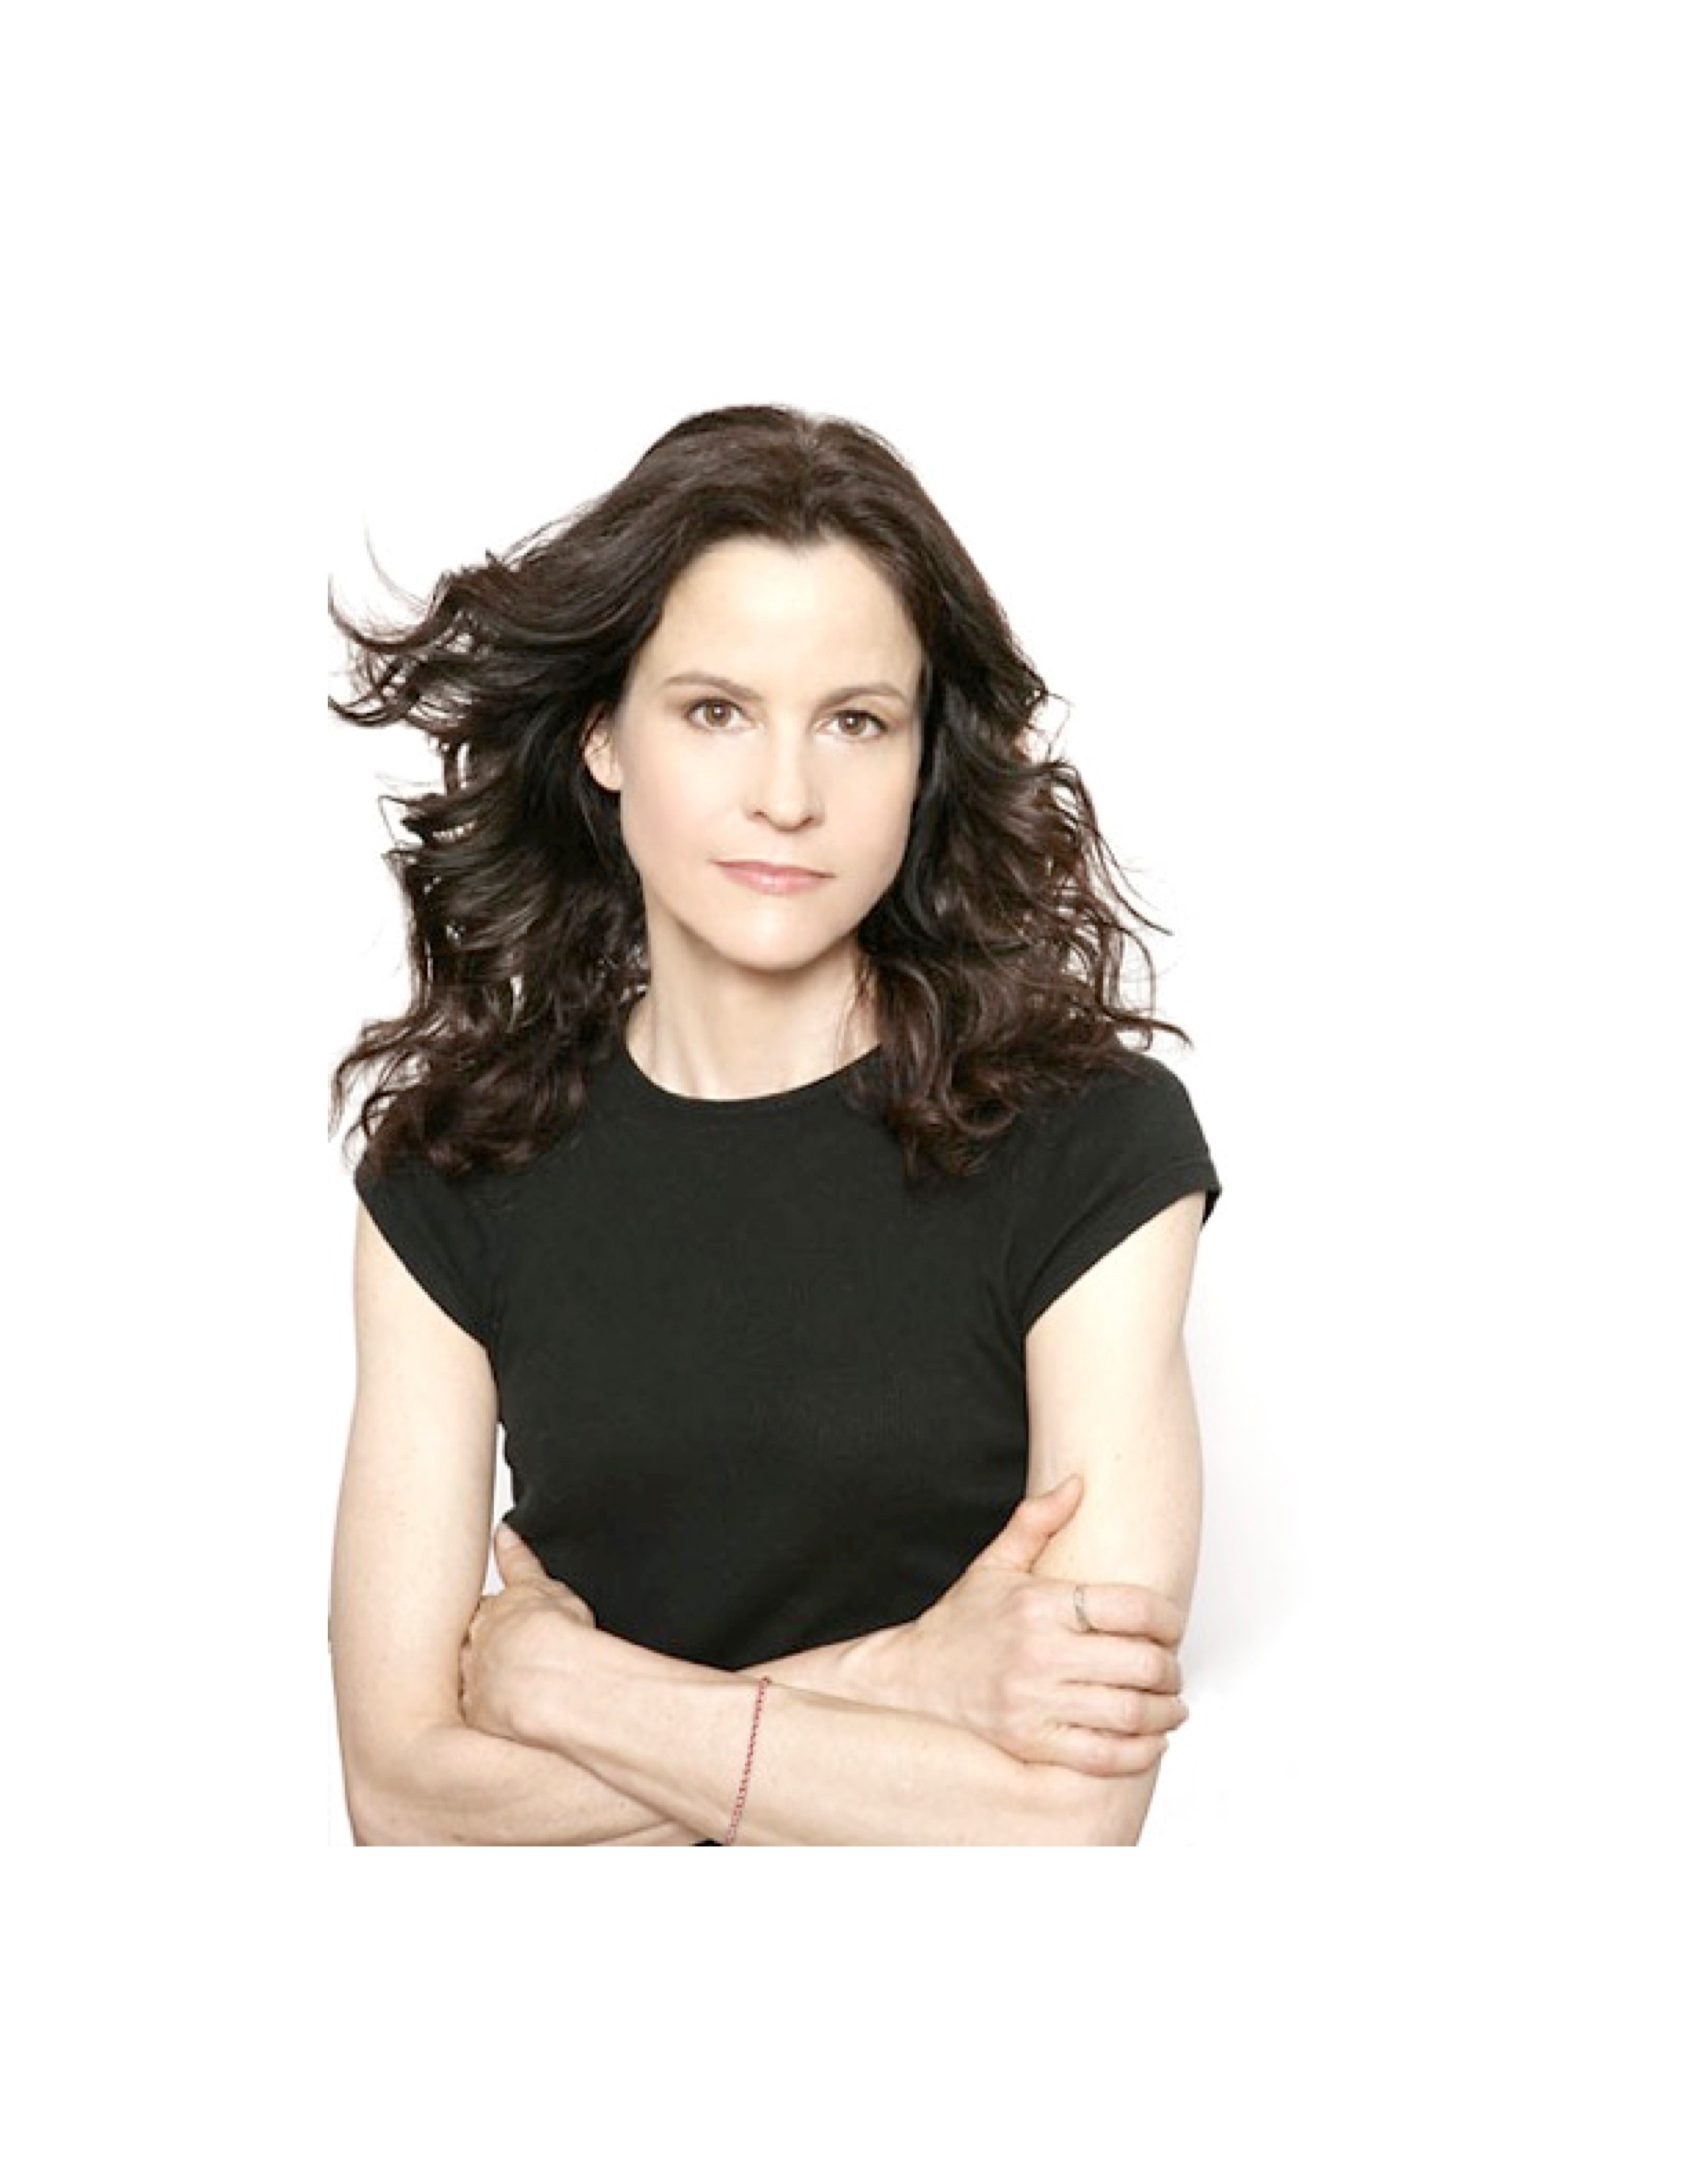 Images of ally sheedy